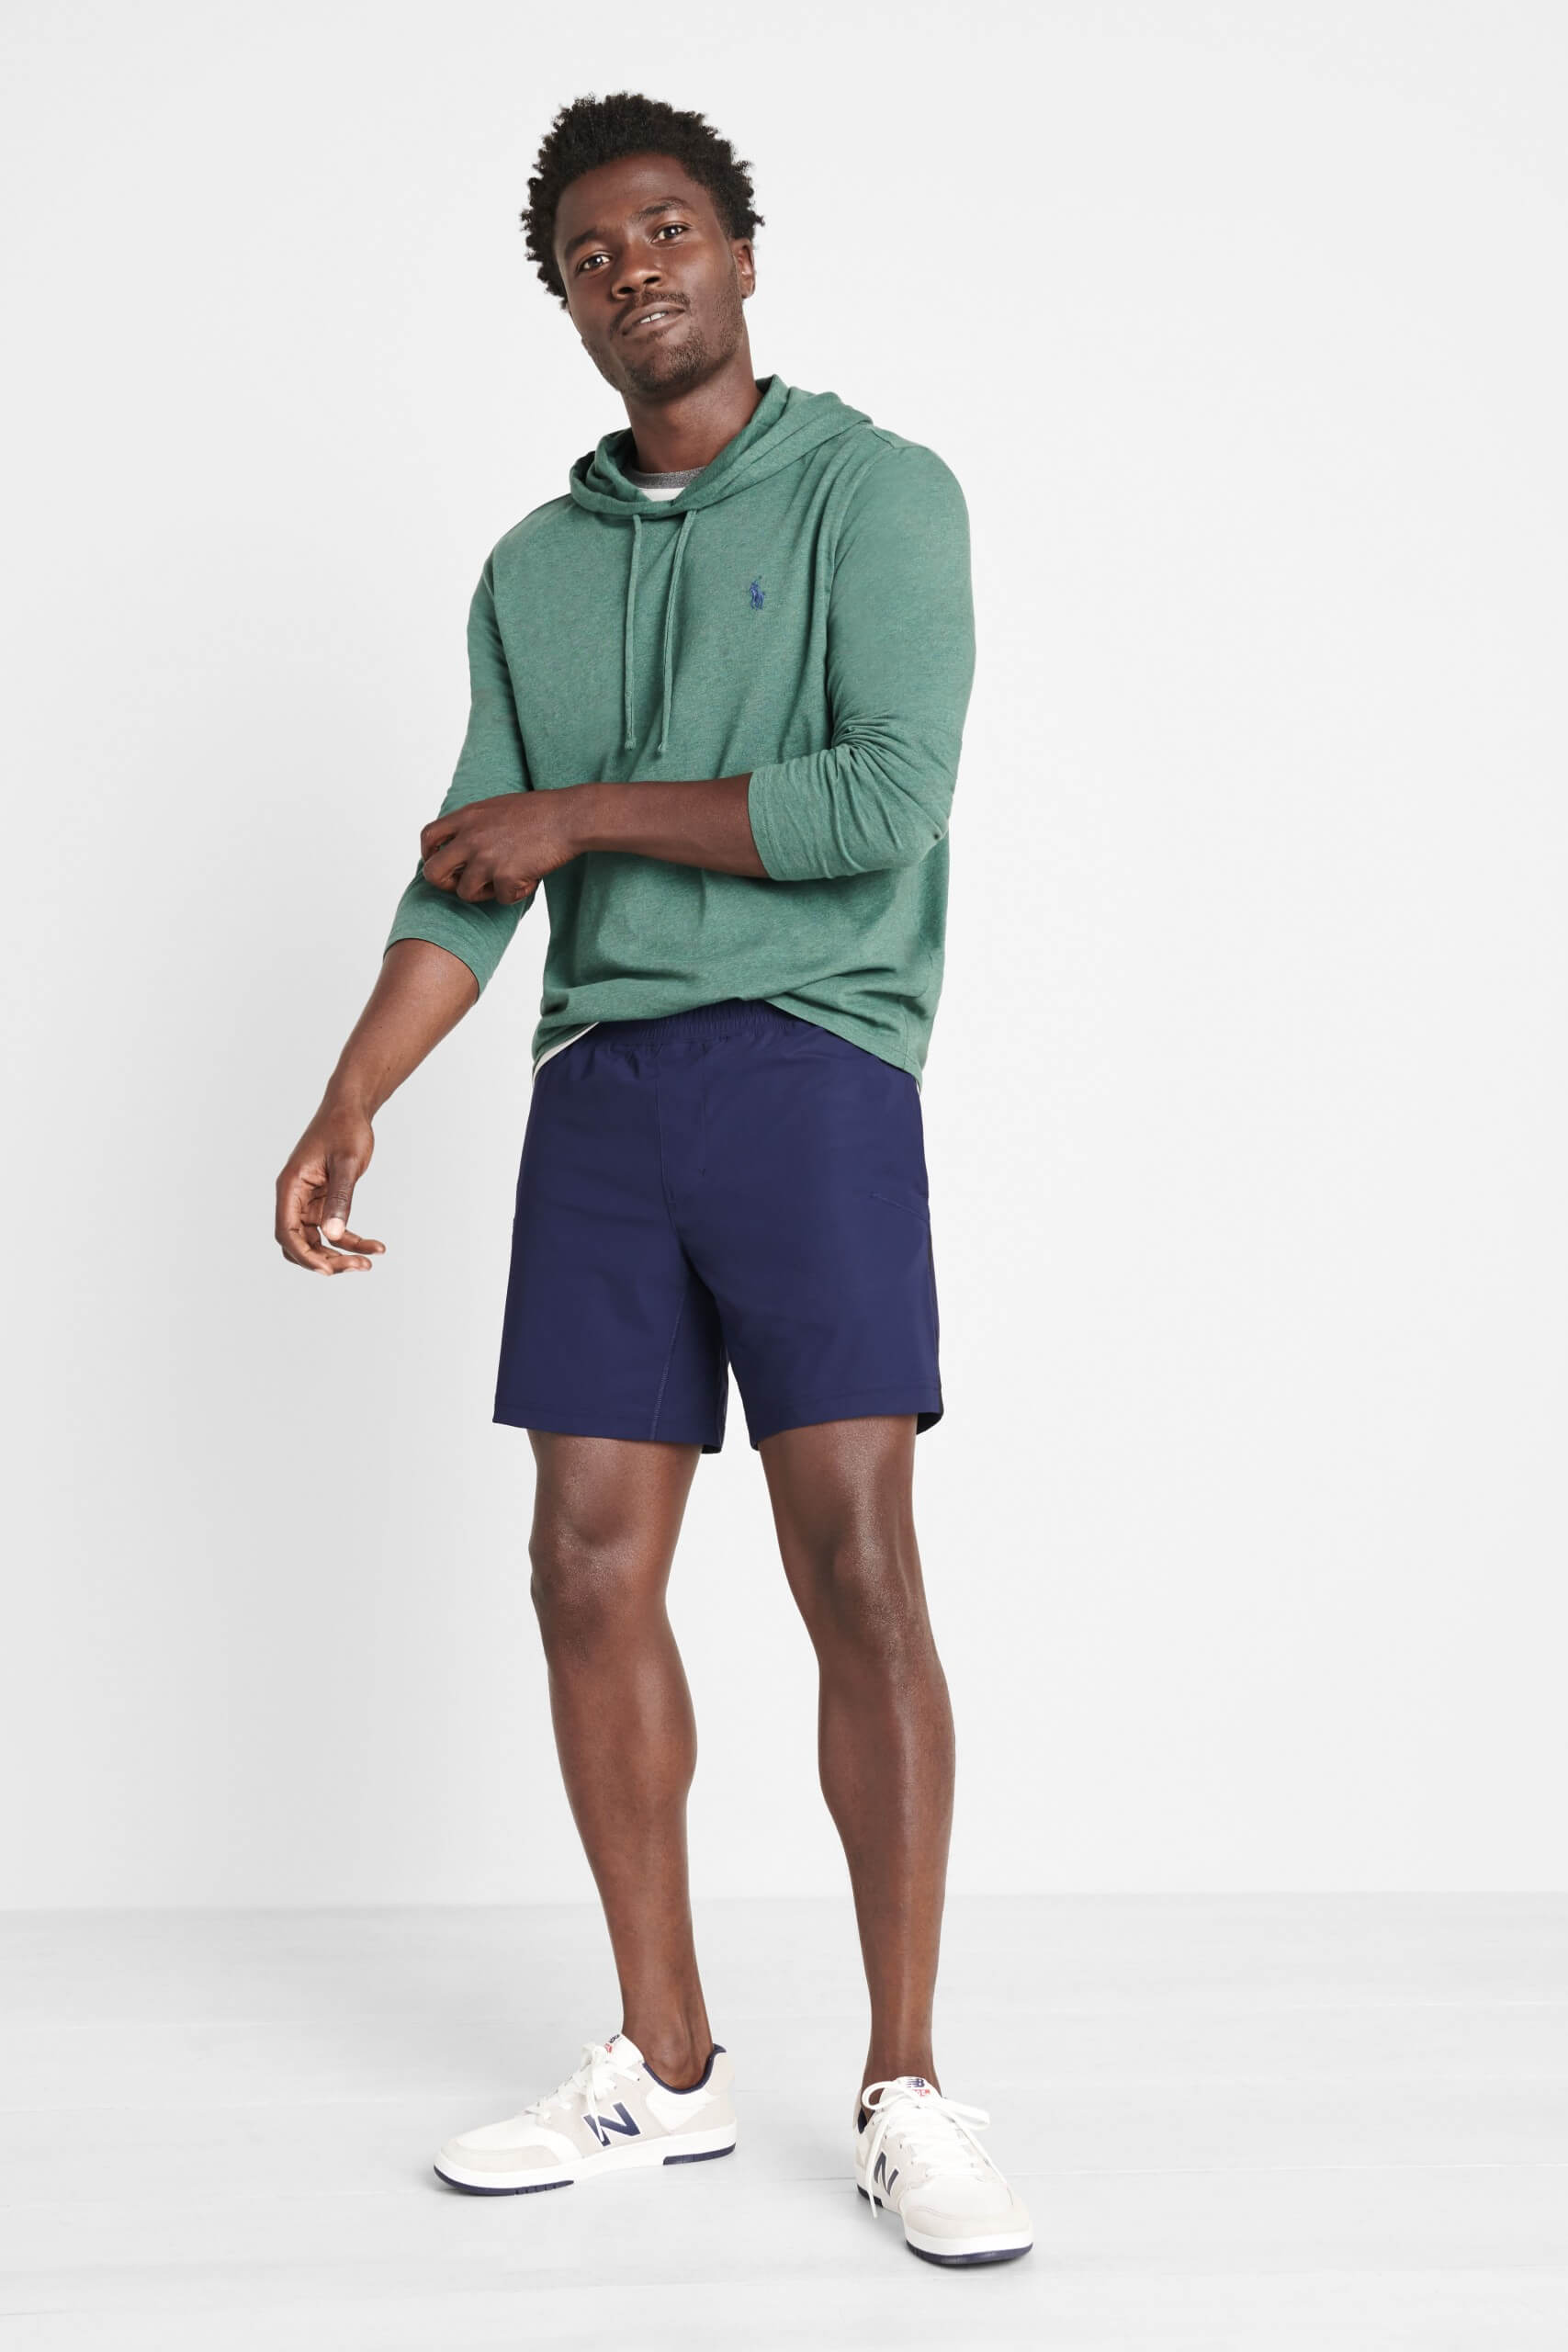 The Best Stylist-Fitting Shorts for Your Build